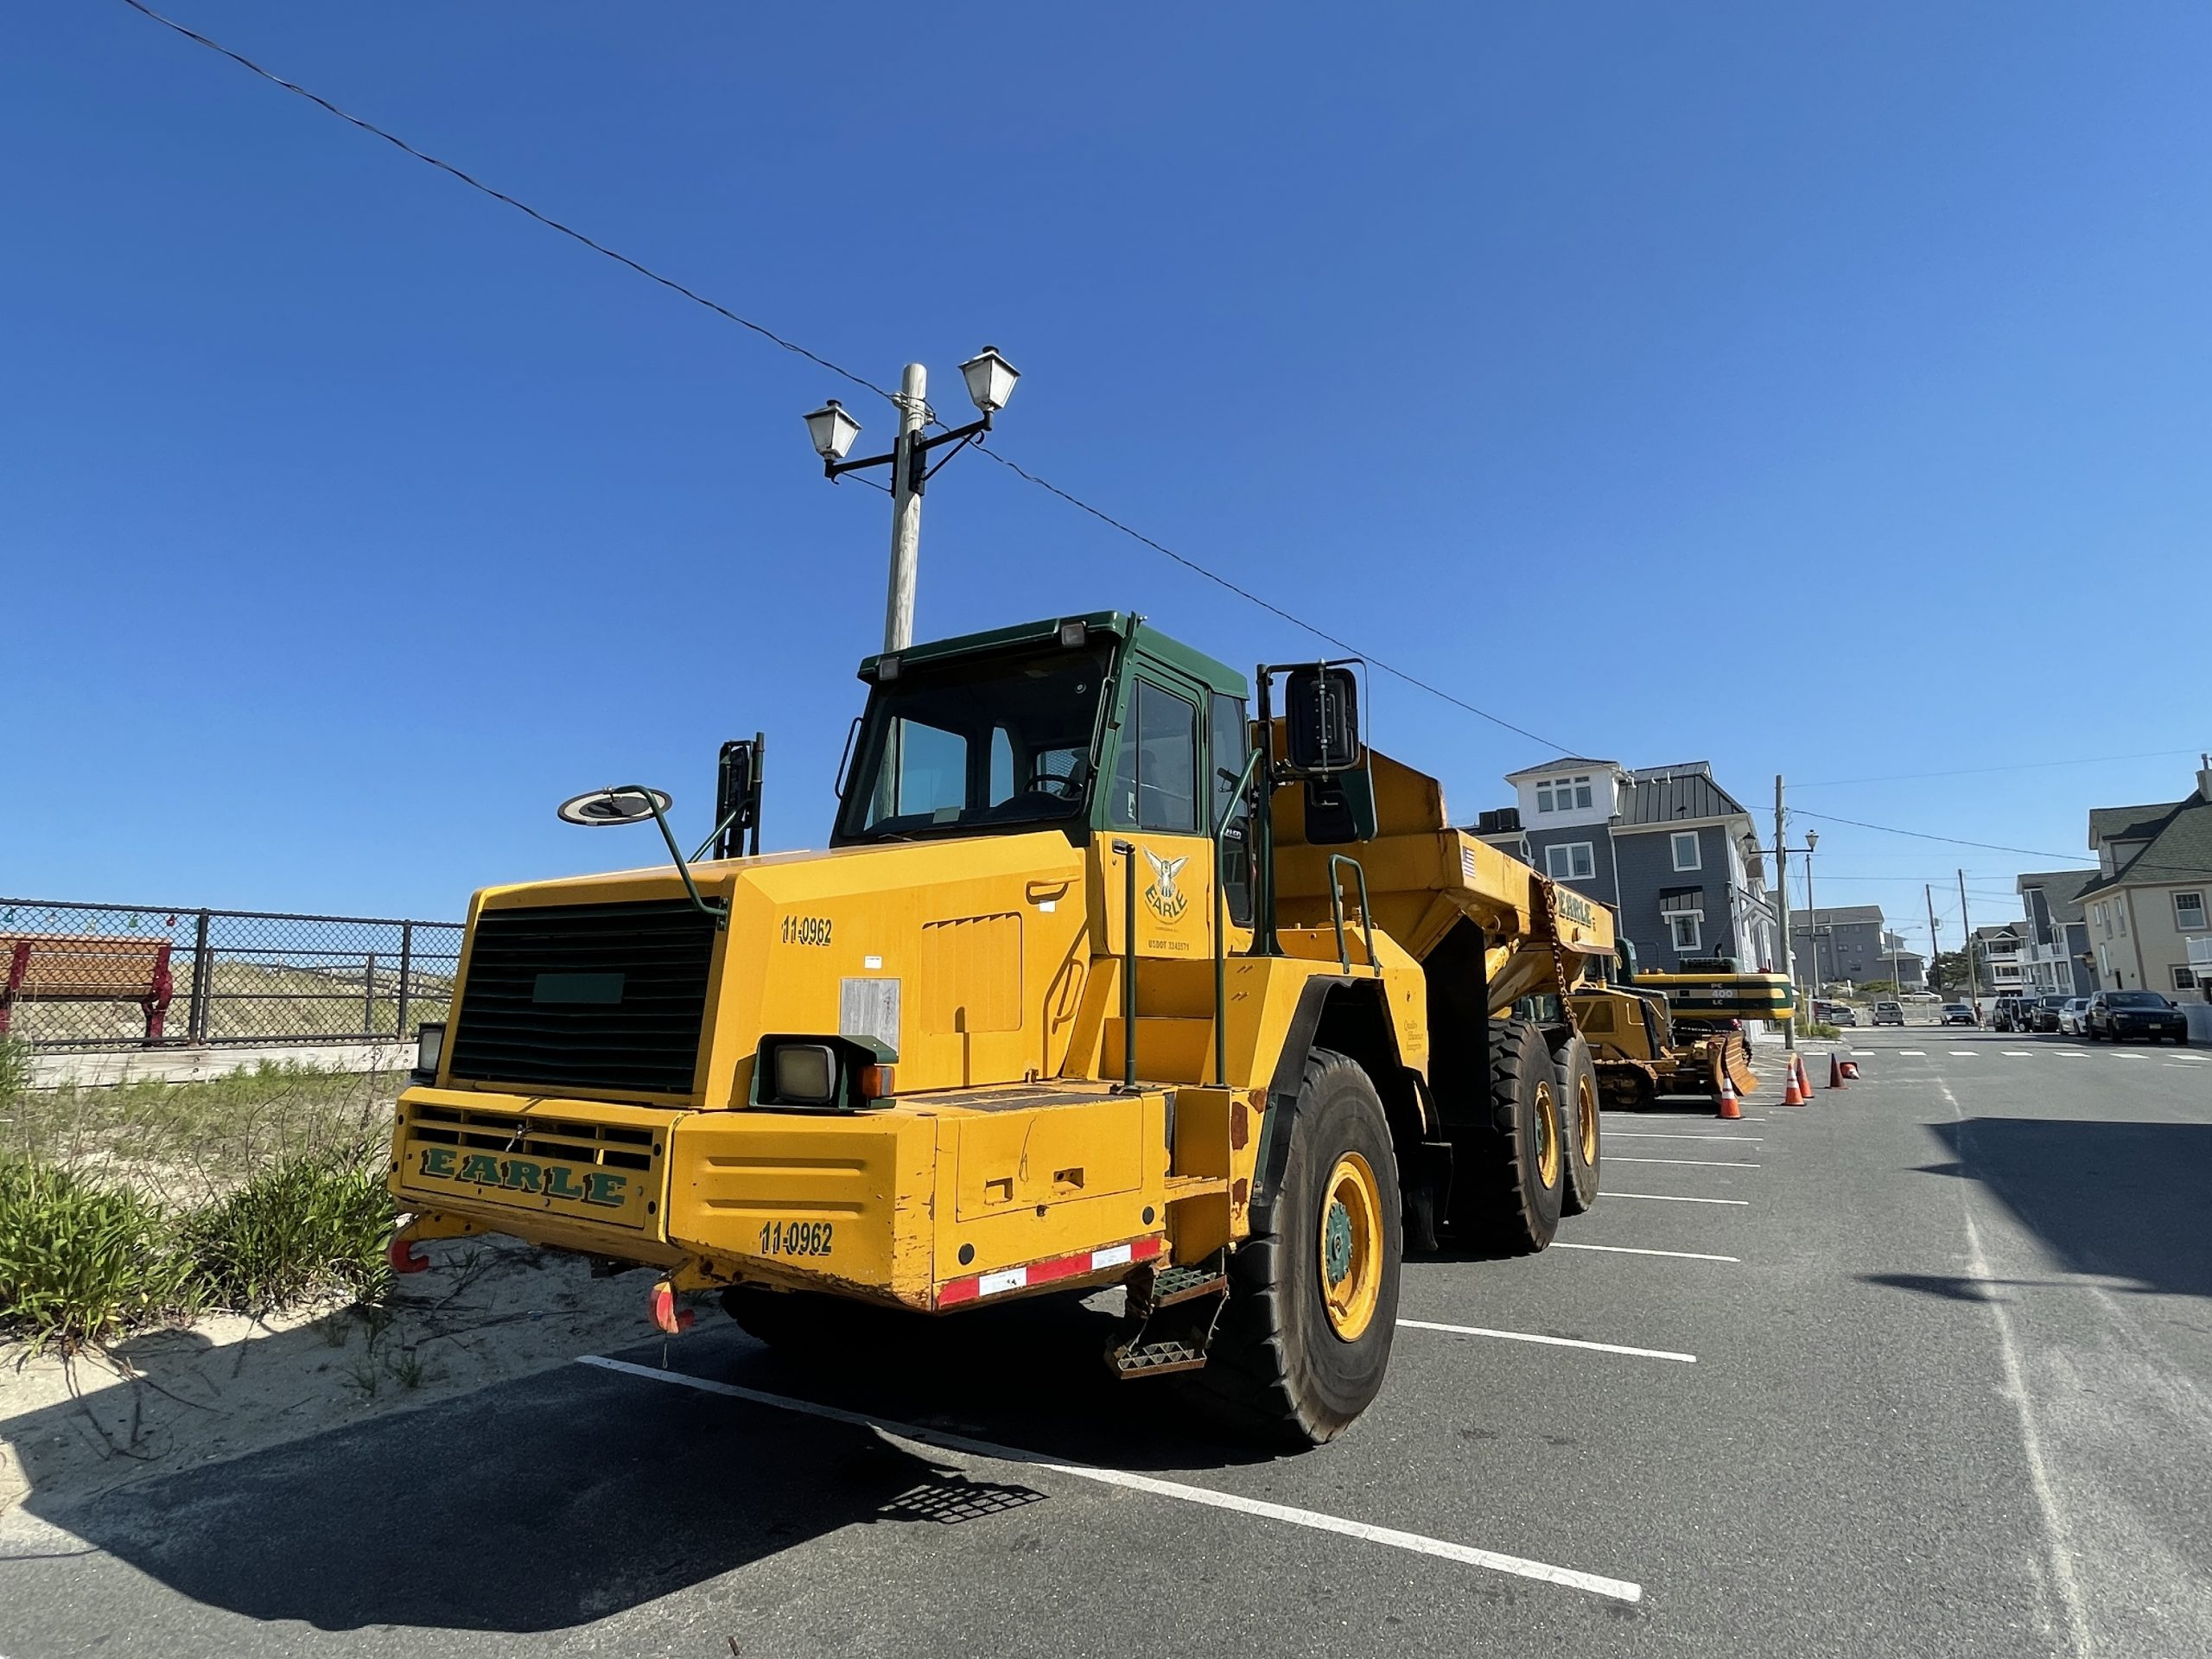 Equipment staged for a second round of repairs in Ortley Beach, June 2021. (Photo: Daniel Nee)